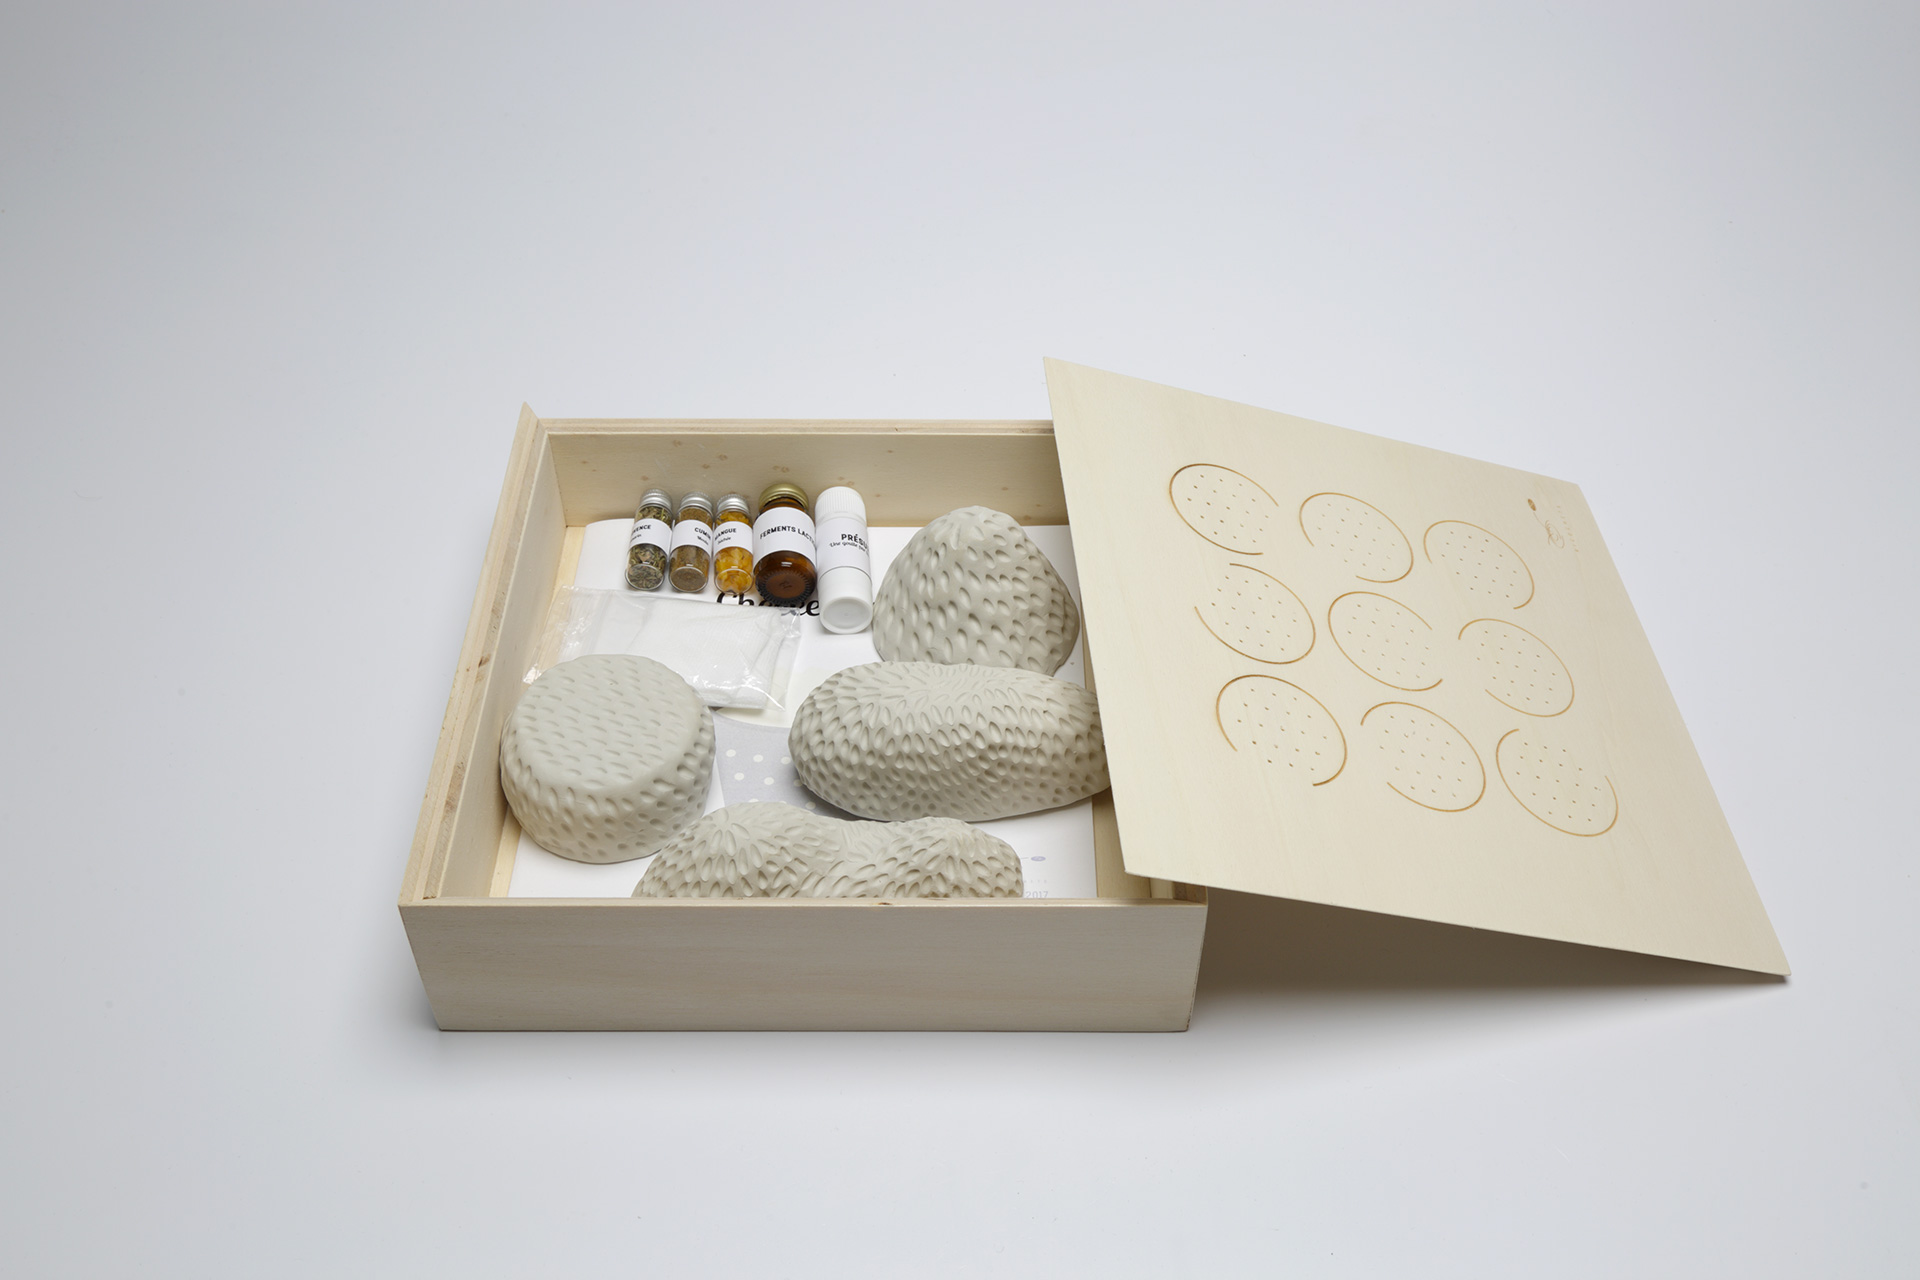 ecole_design_culinaire_master_food_education_box_cheese